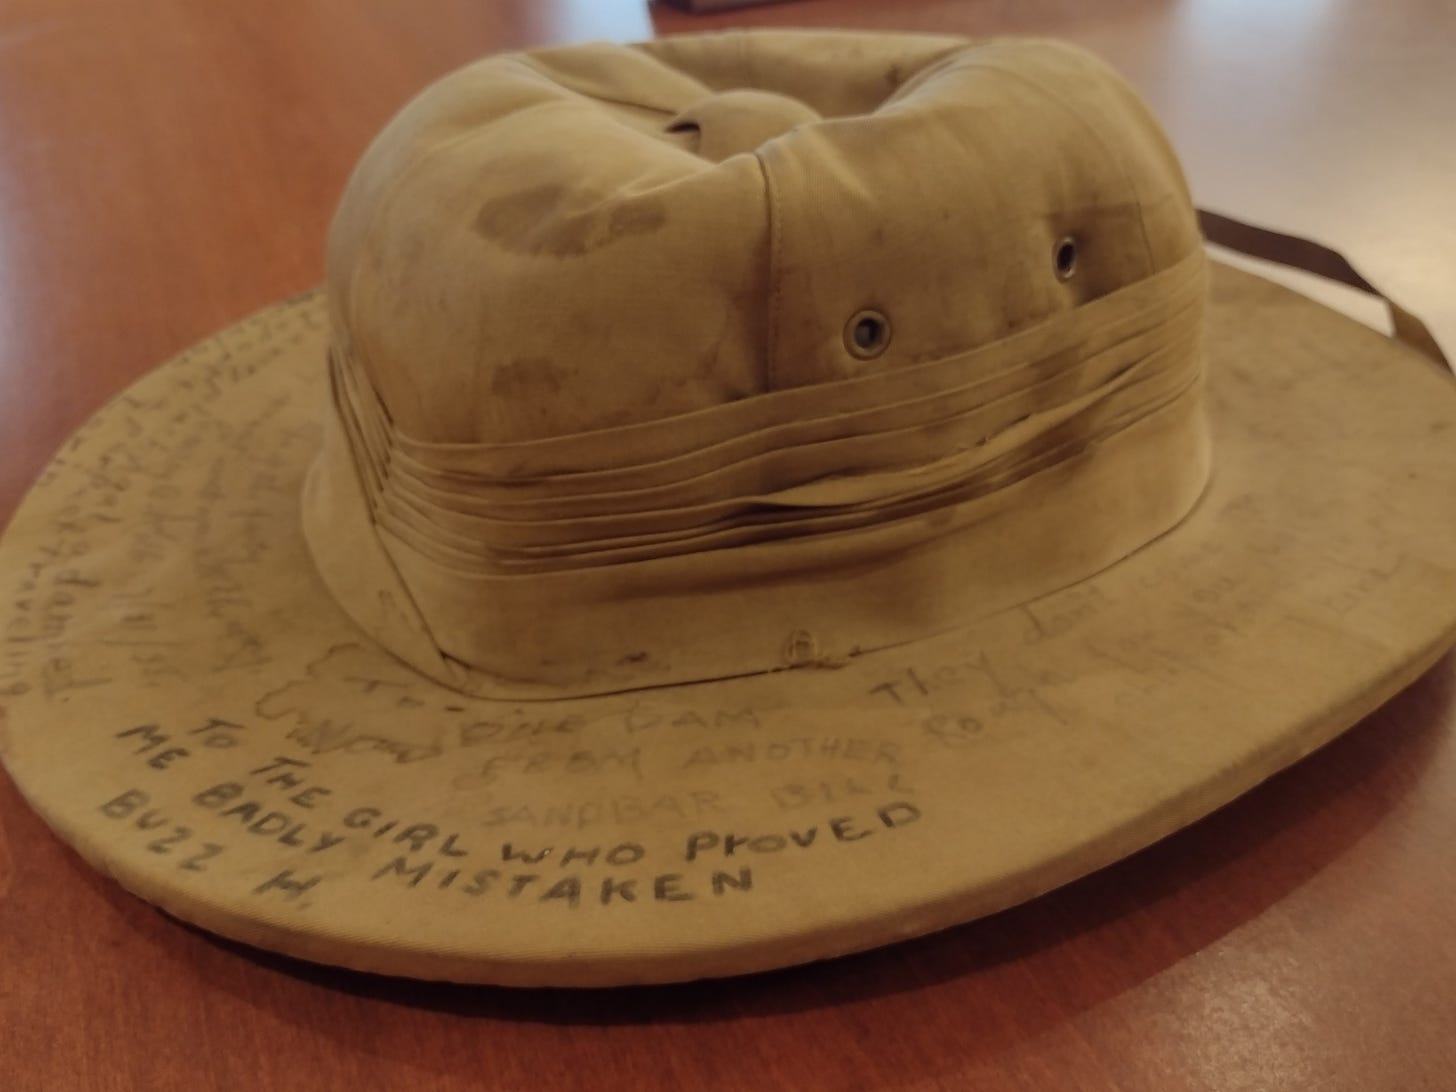 A slightly squash, tan pith helmet with signatures around the brim, including "to the girl who proved me badly mistaken -Buzz H."